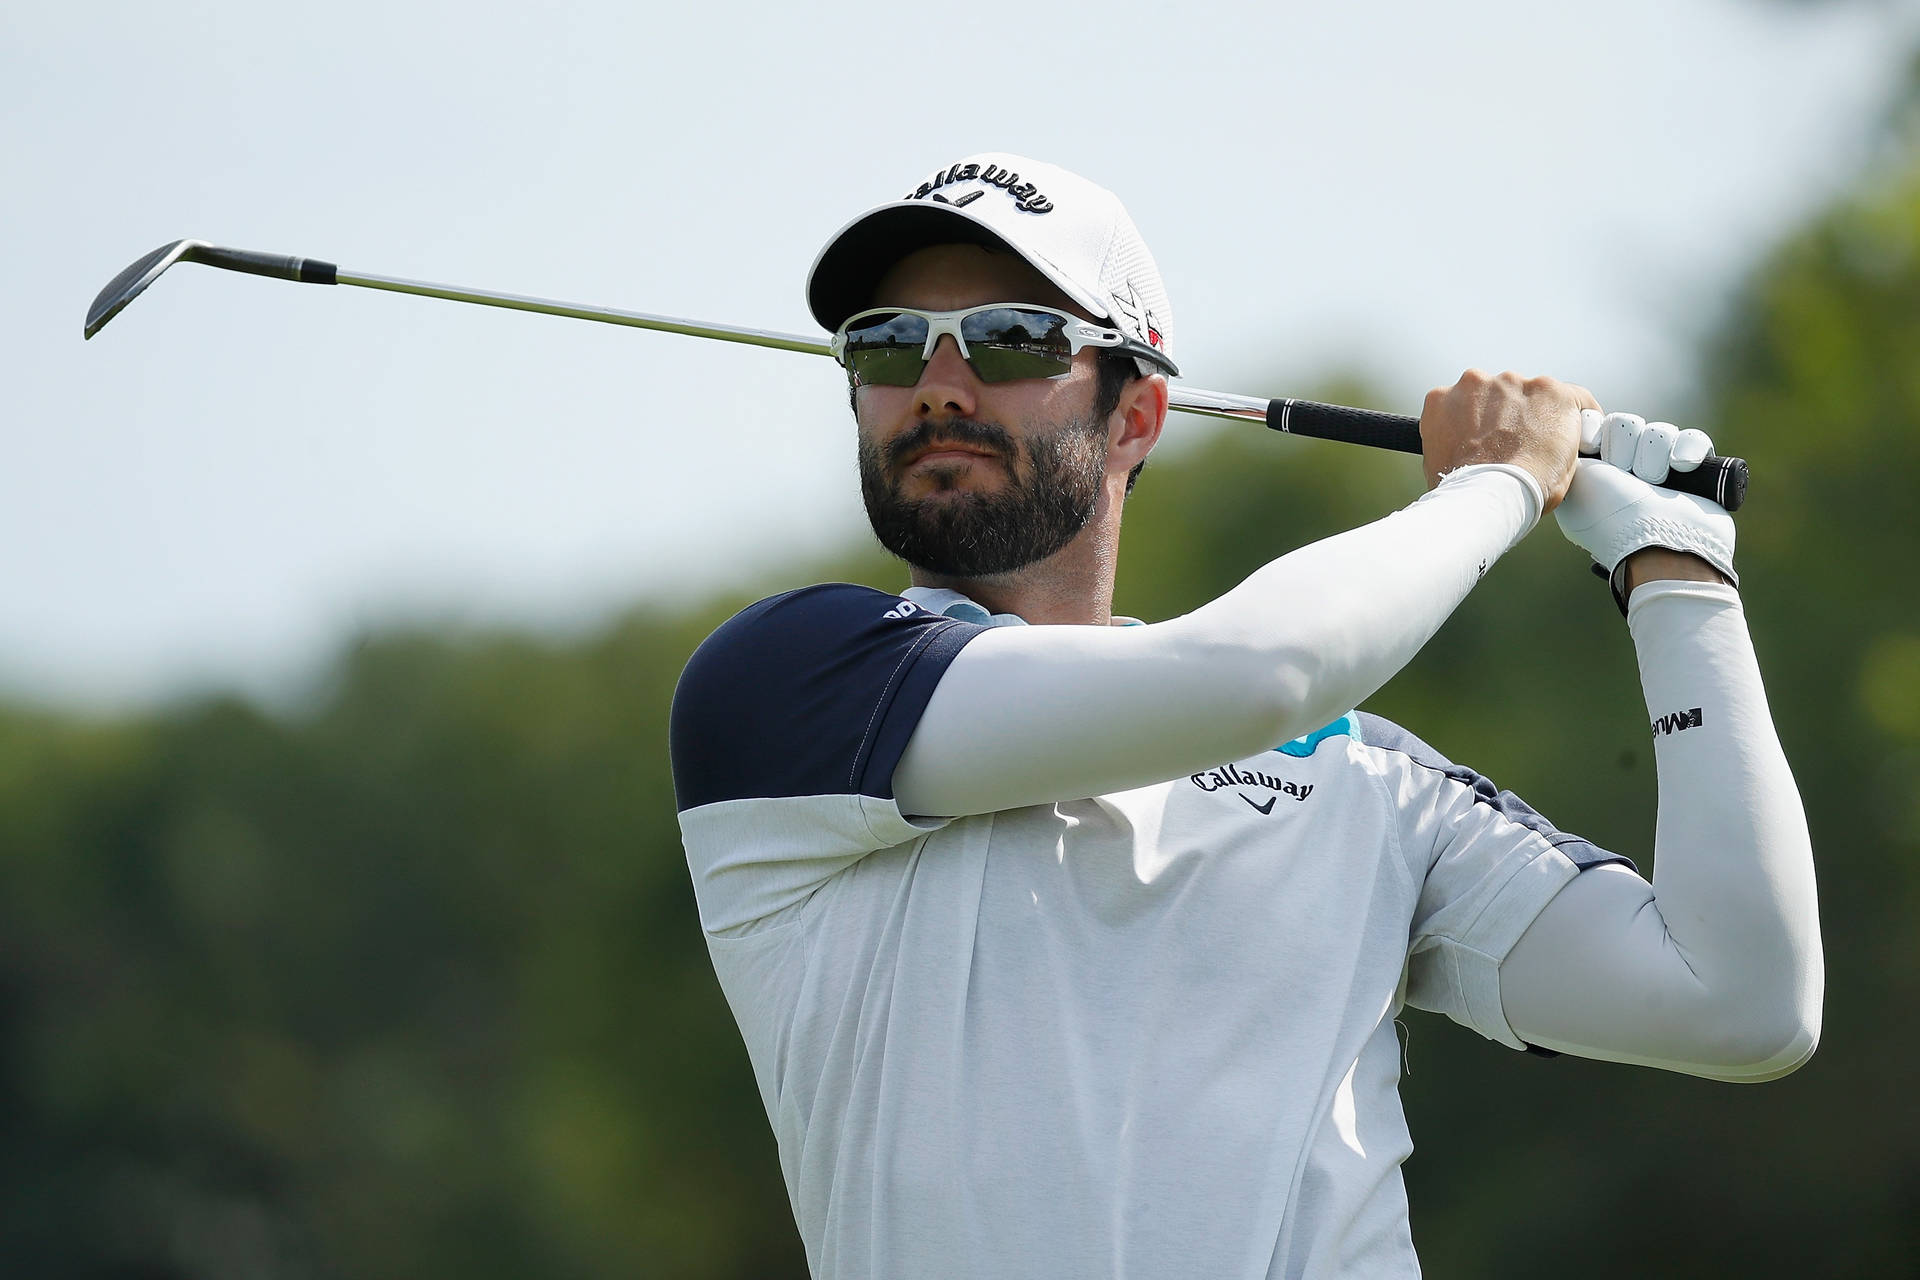 Adam Hadwin In Action On The Golf Course Wallpaper